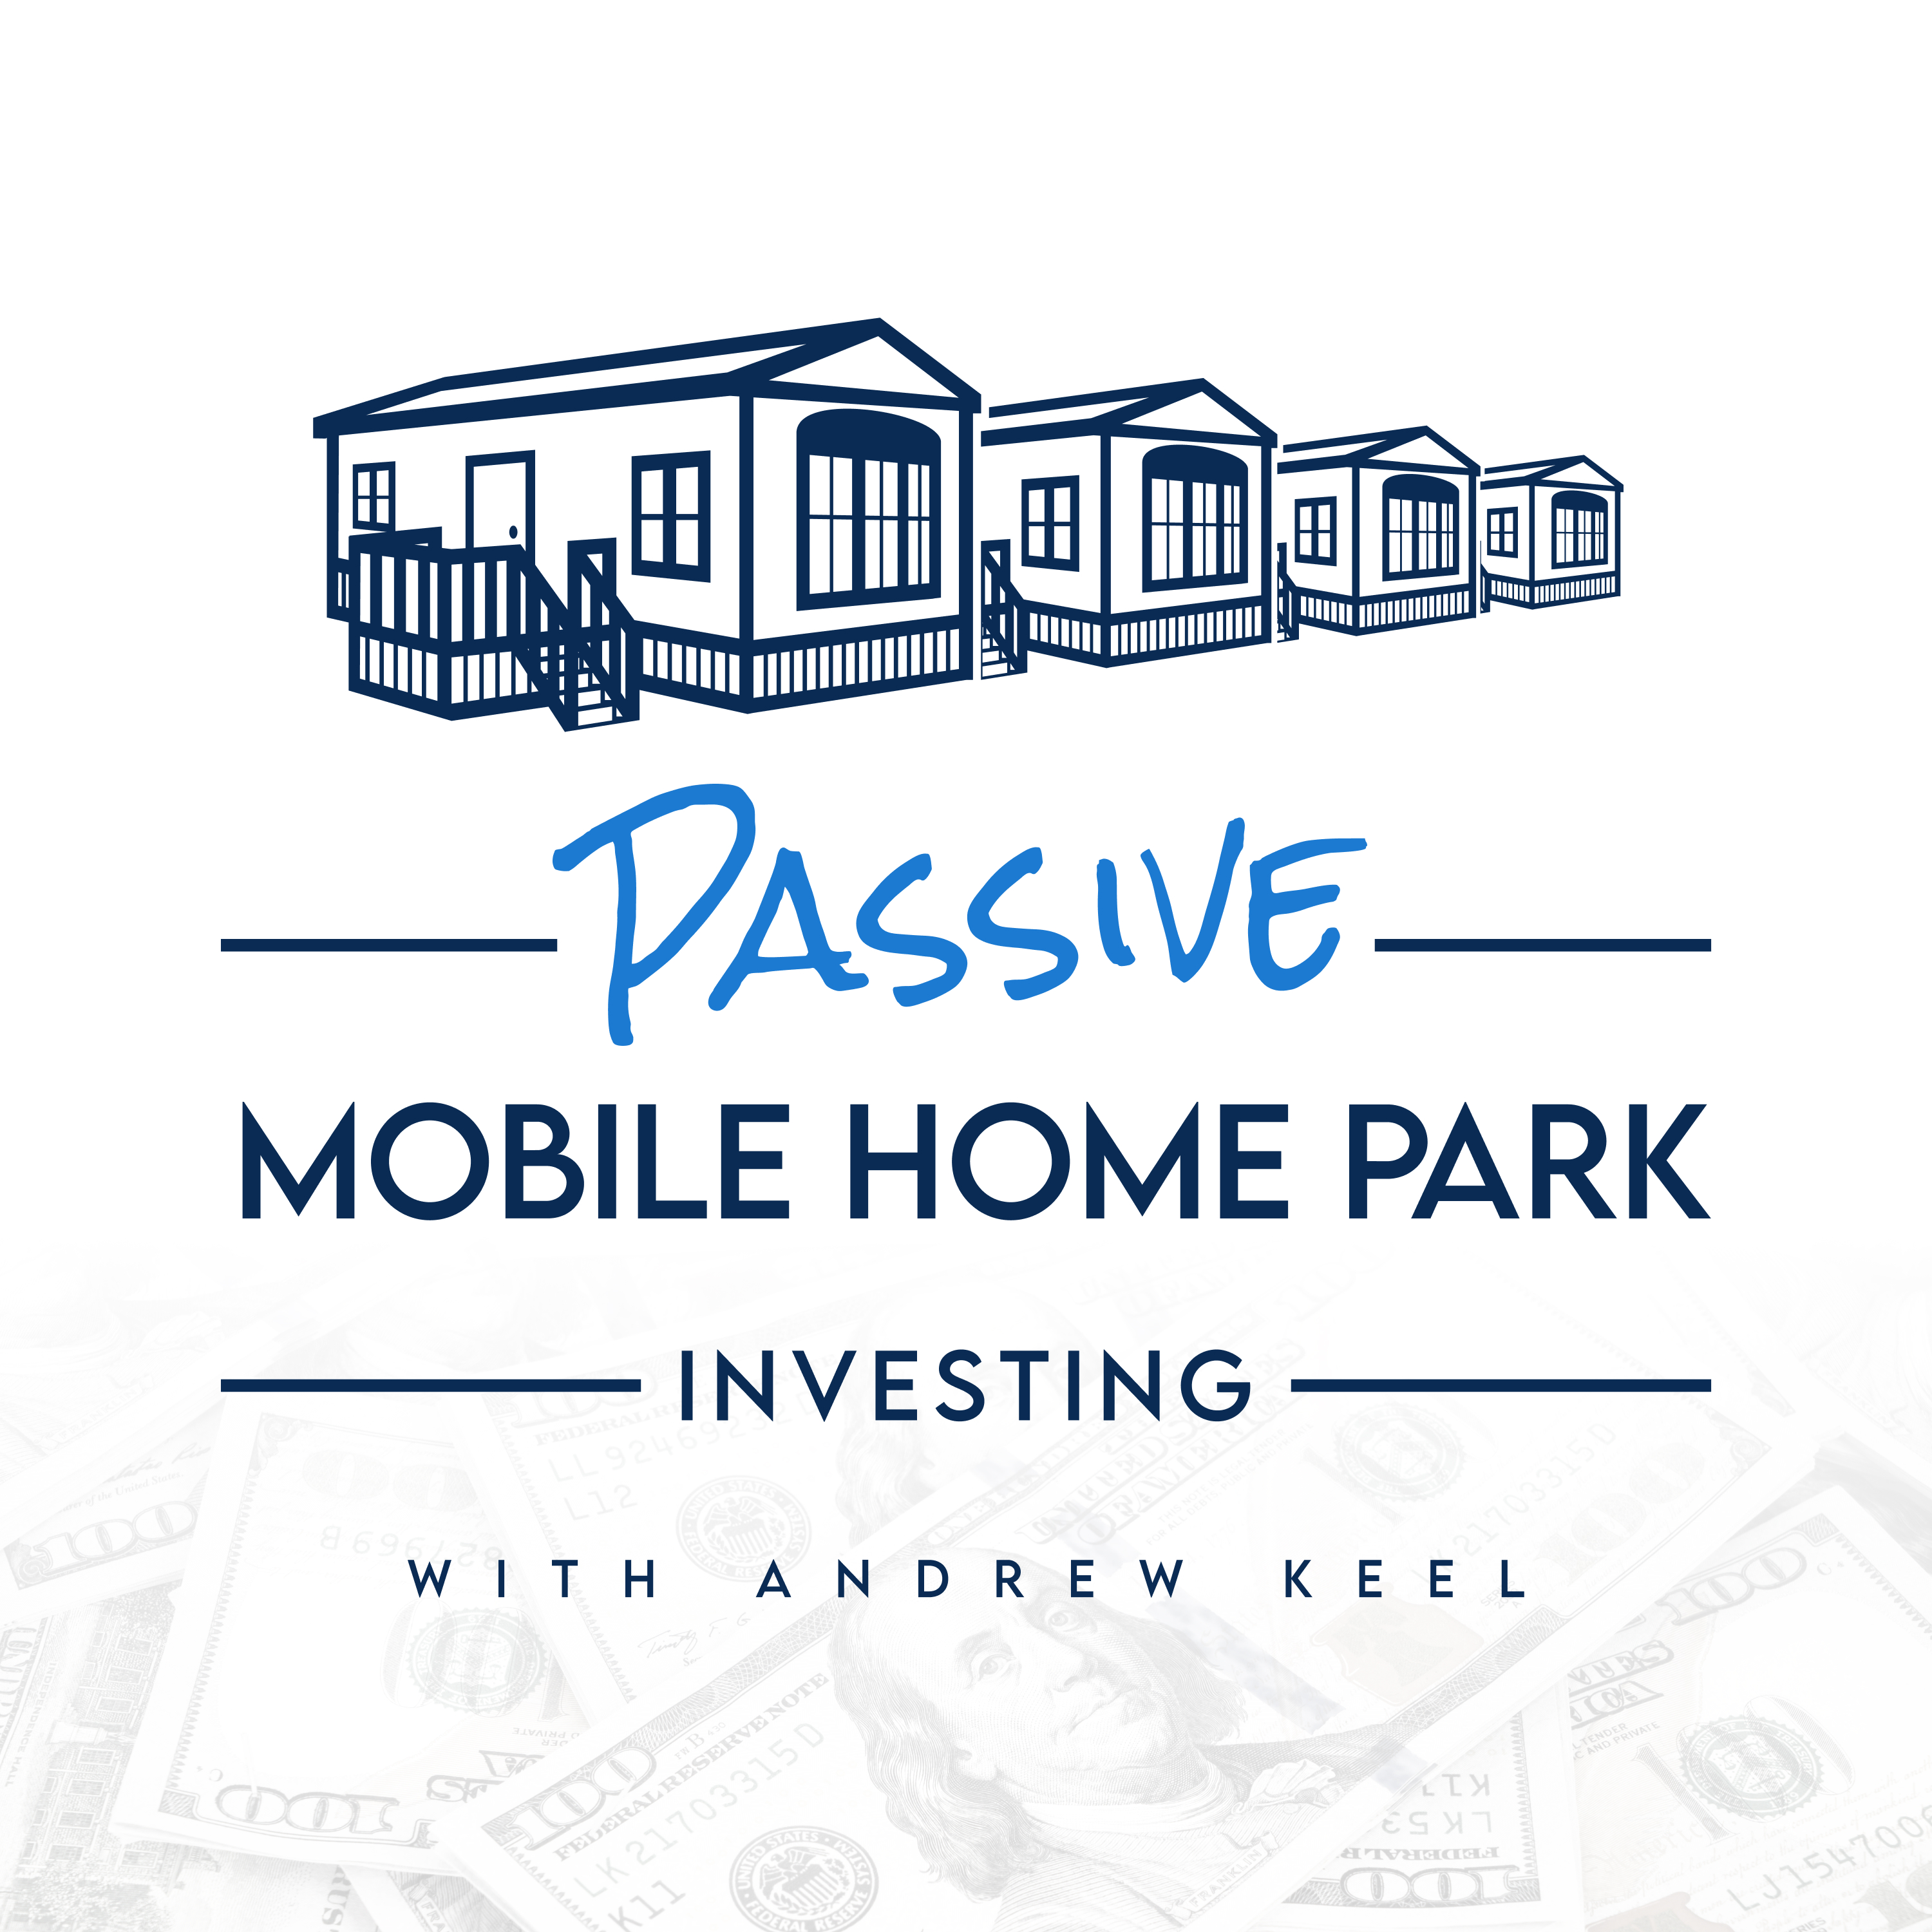 Interview with Steve Case, Active Mobile Home Park Investor and founding member of SECO